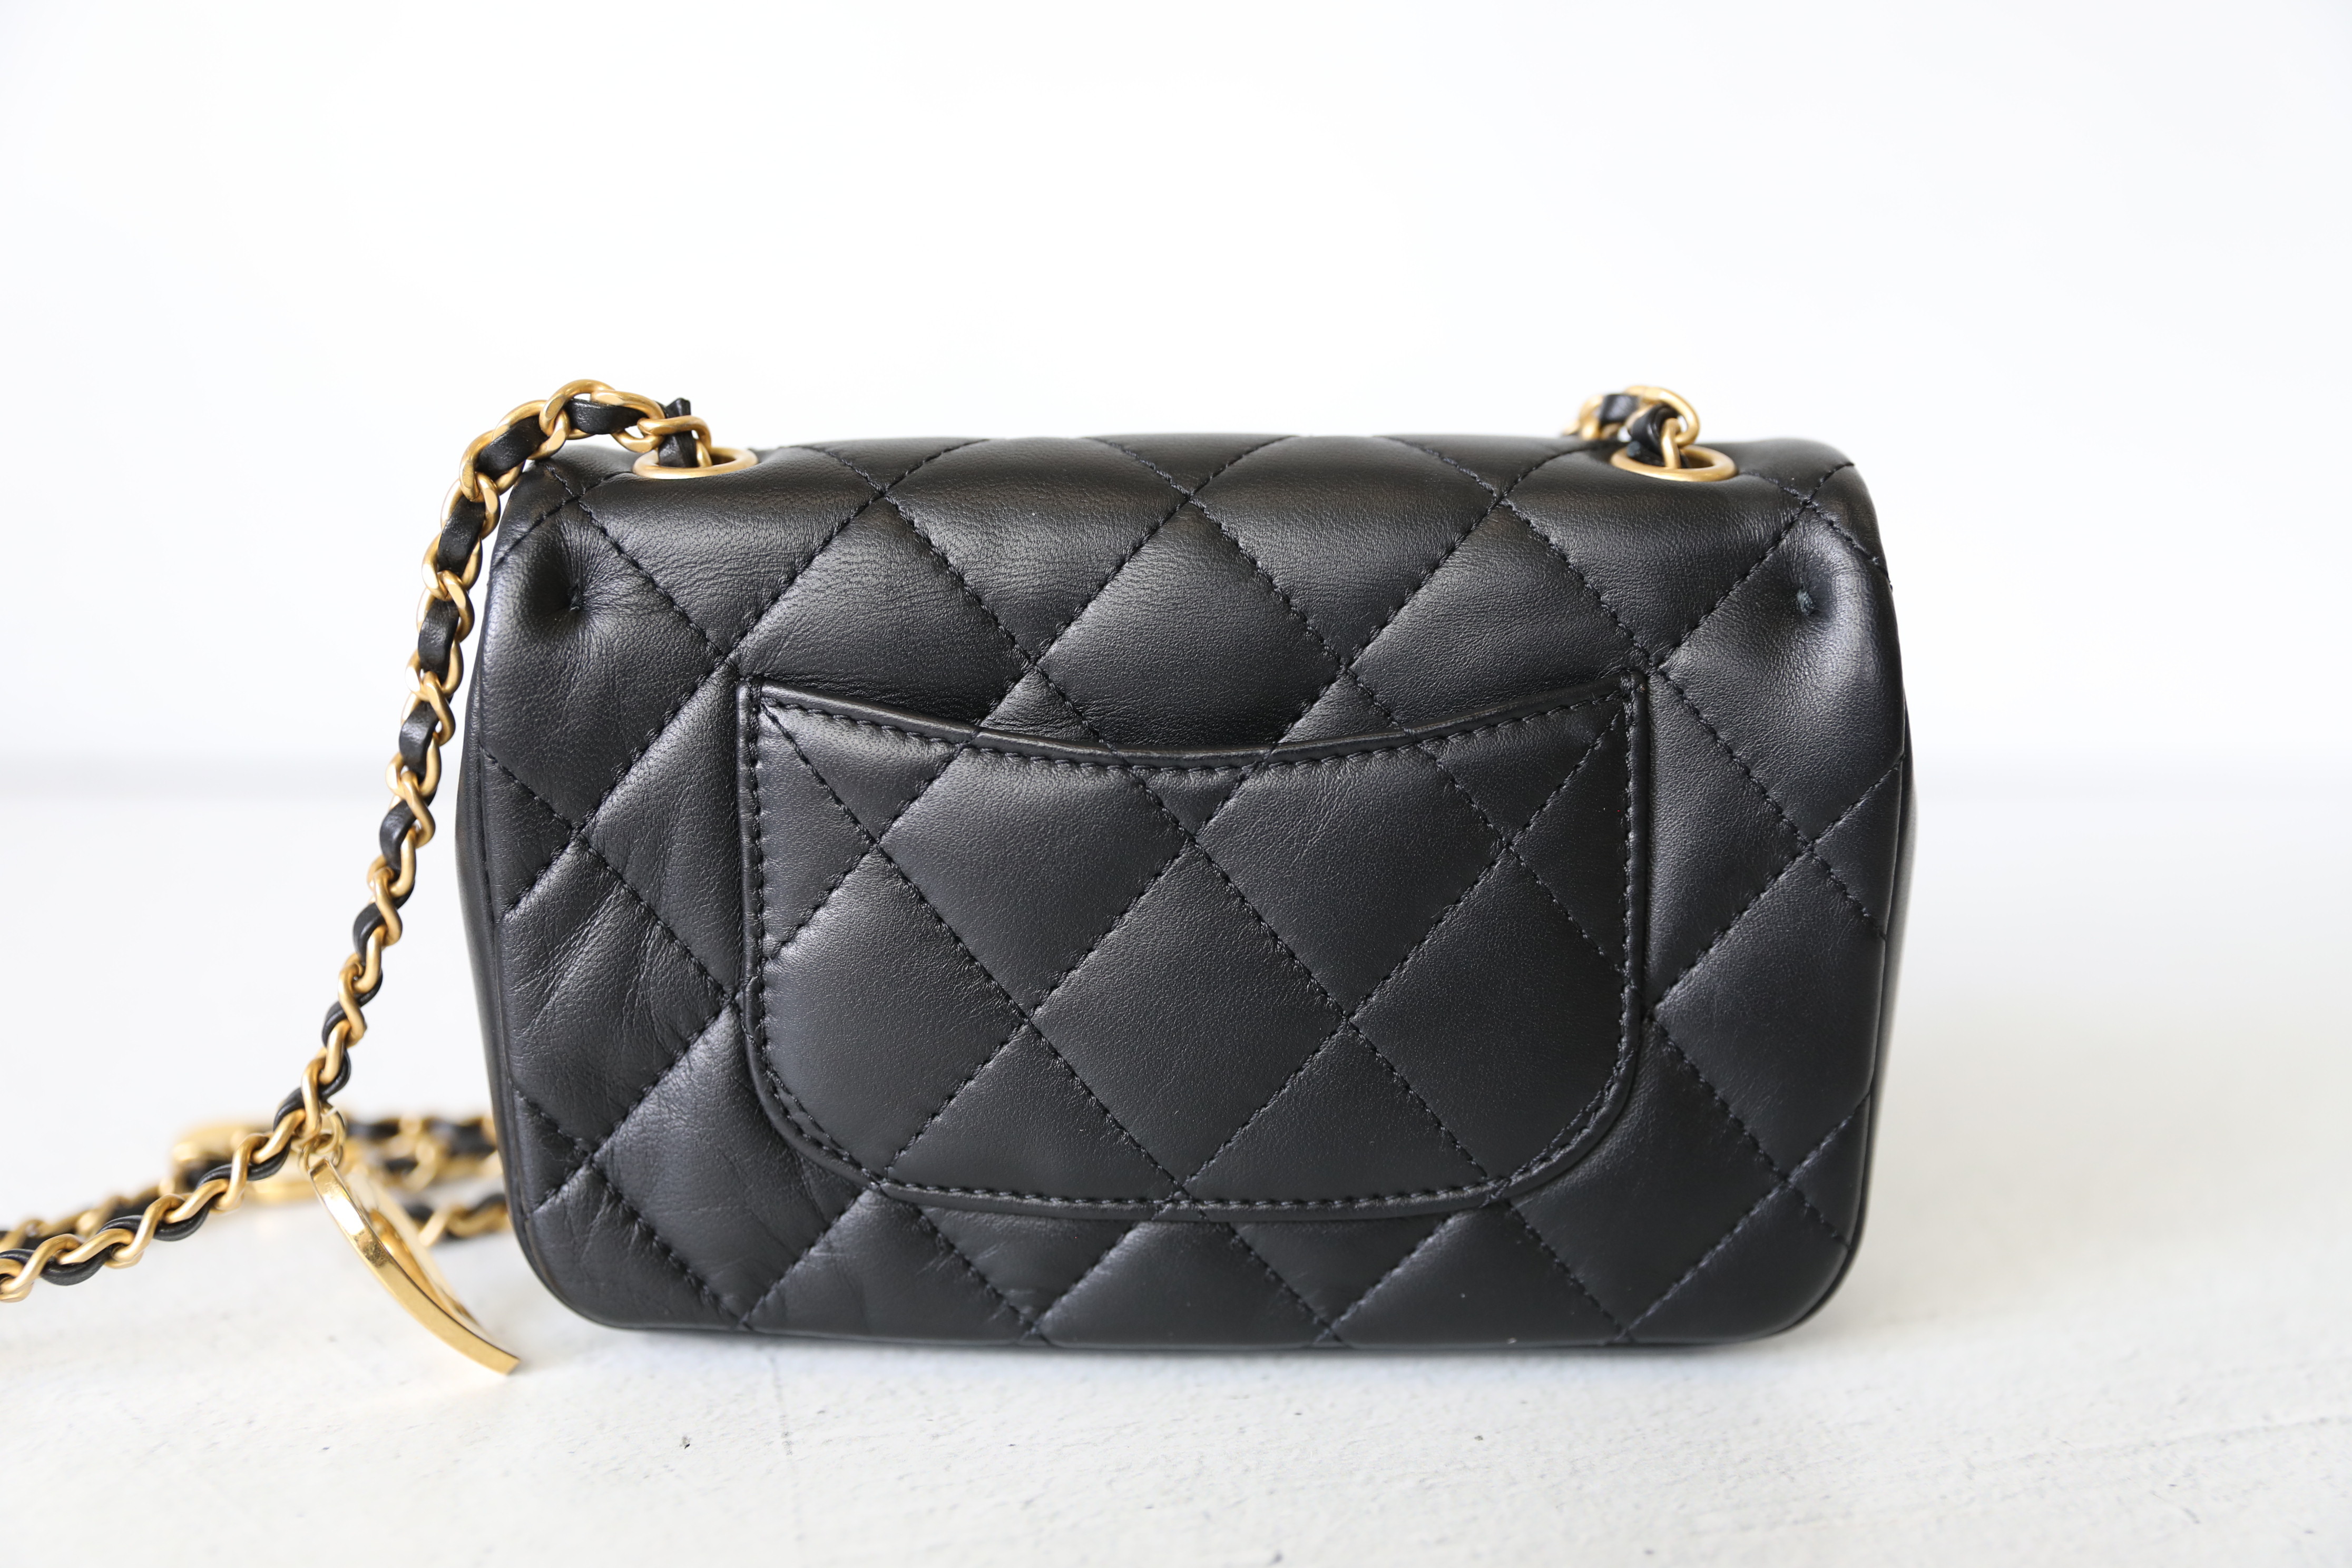 Chanel Seasonal Heart Bag, Black With Pearl Chain, Preowned In Box (Ships  Duty Free From London) - Julia Rose Boston